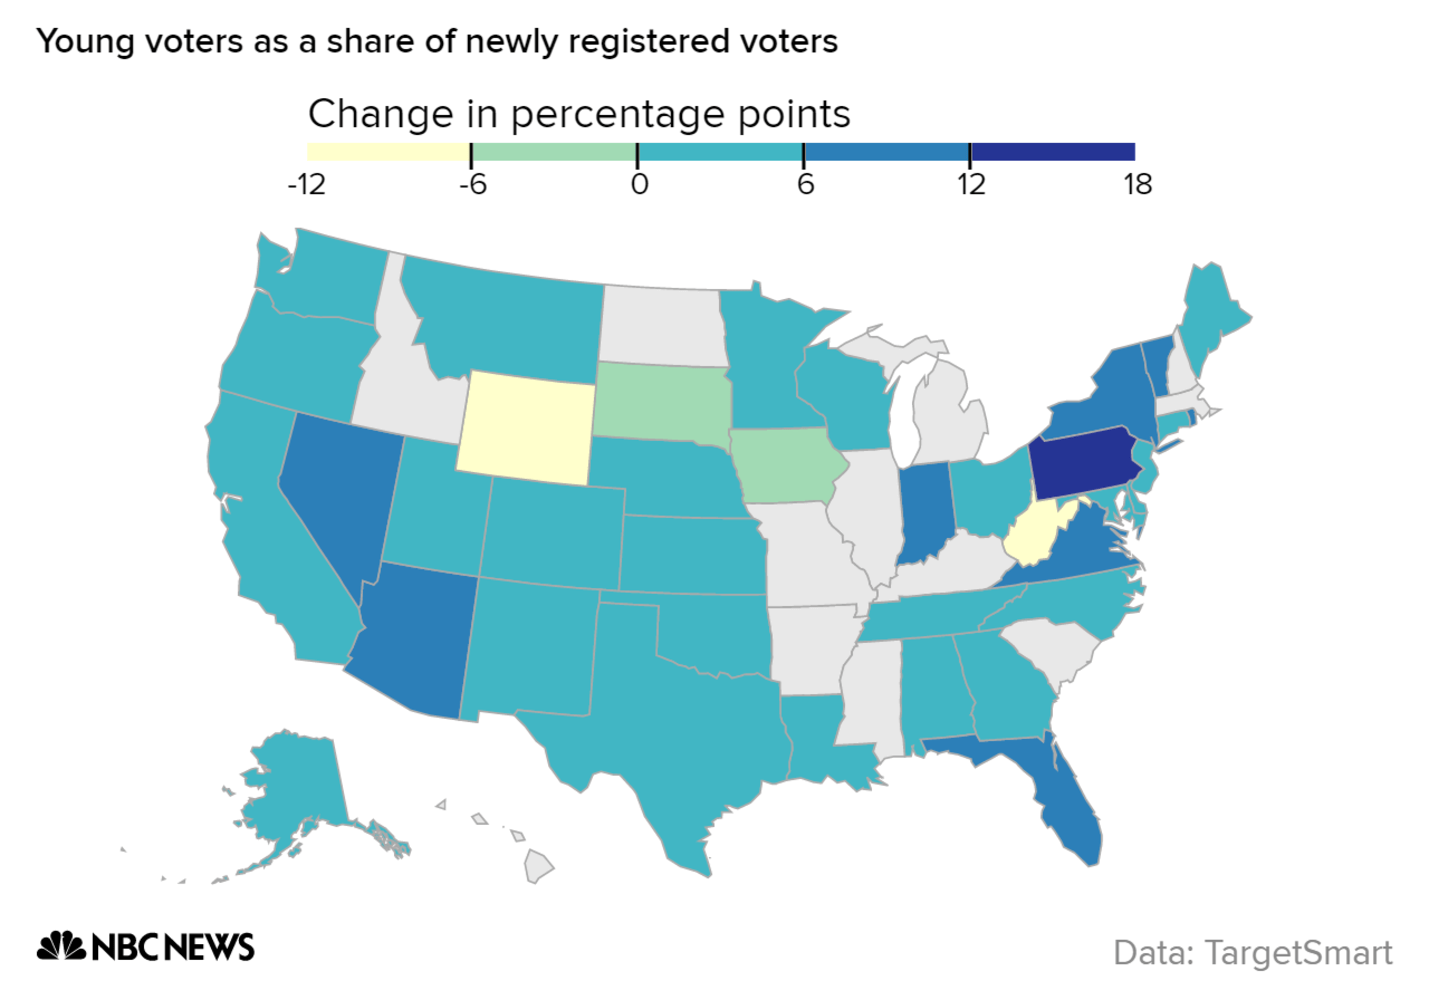 young_voters_as_a_share_of_newly_registered_voters_legend_group_chartbuilder_1_8e2b8b171b65269f6709ededa0dc0e2a.nbcnews-ux-2880-1000.png